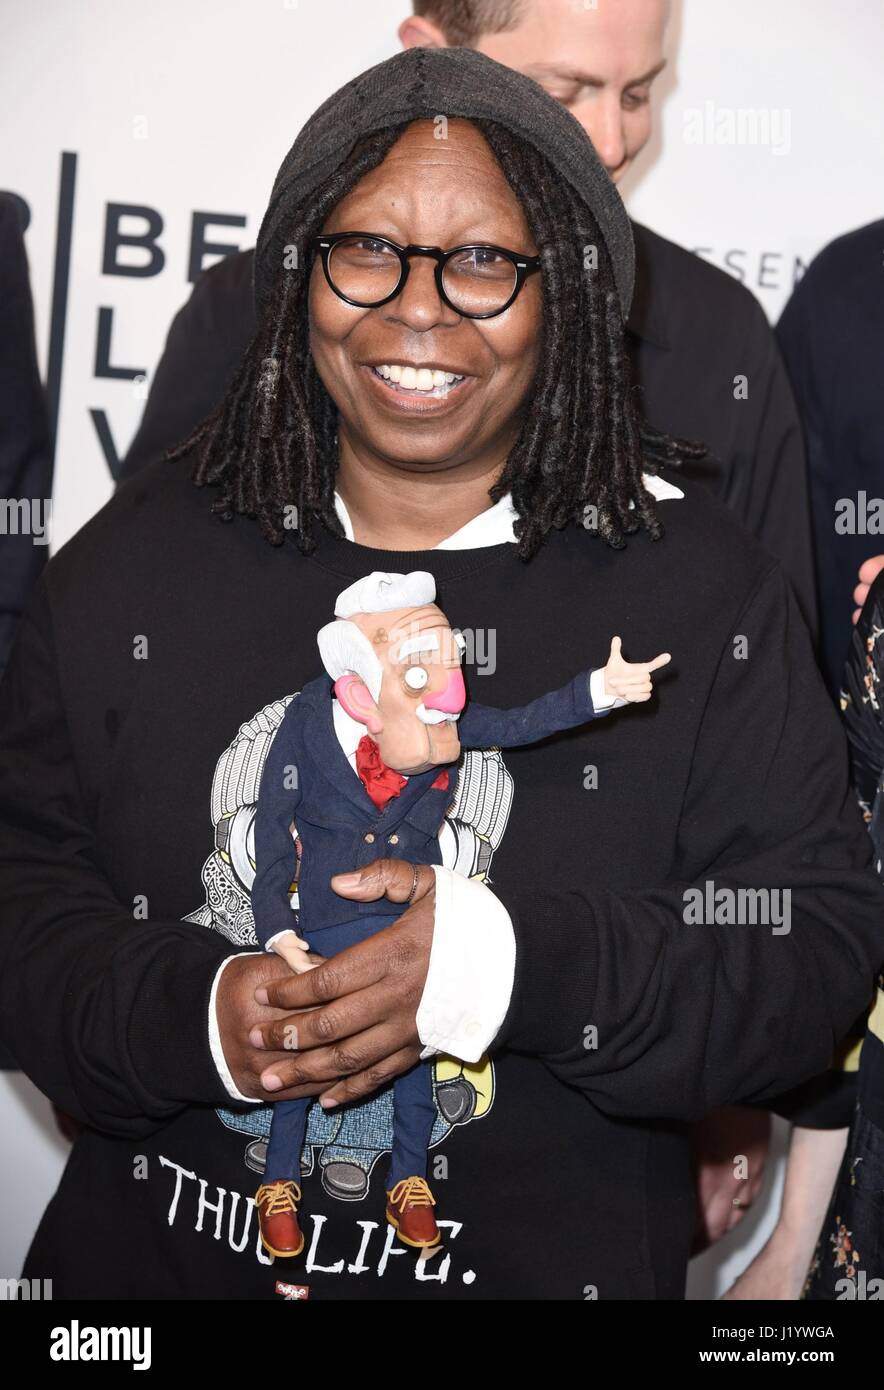 New York, NY, USA. 22nd Apr, 2017. Whoopi Goldberg with puppets from 'Second to None' animated short. at arrivals for Animated Shorts Program at the 2017 Tribeca Film Festival, The School of Visual Arts (SVA) Theatre, New York, NY April 22, 2017. Credit: Derek Storm/Everett Collection/Alamy Live News Stock Photo